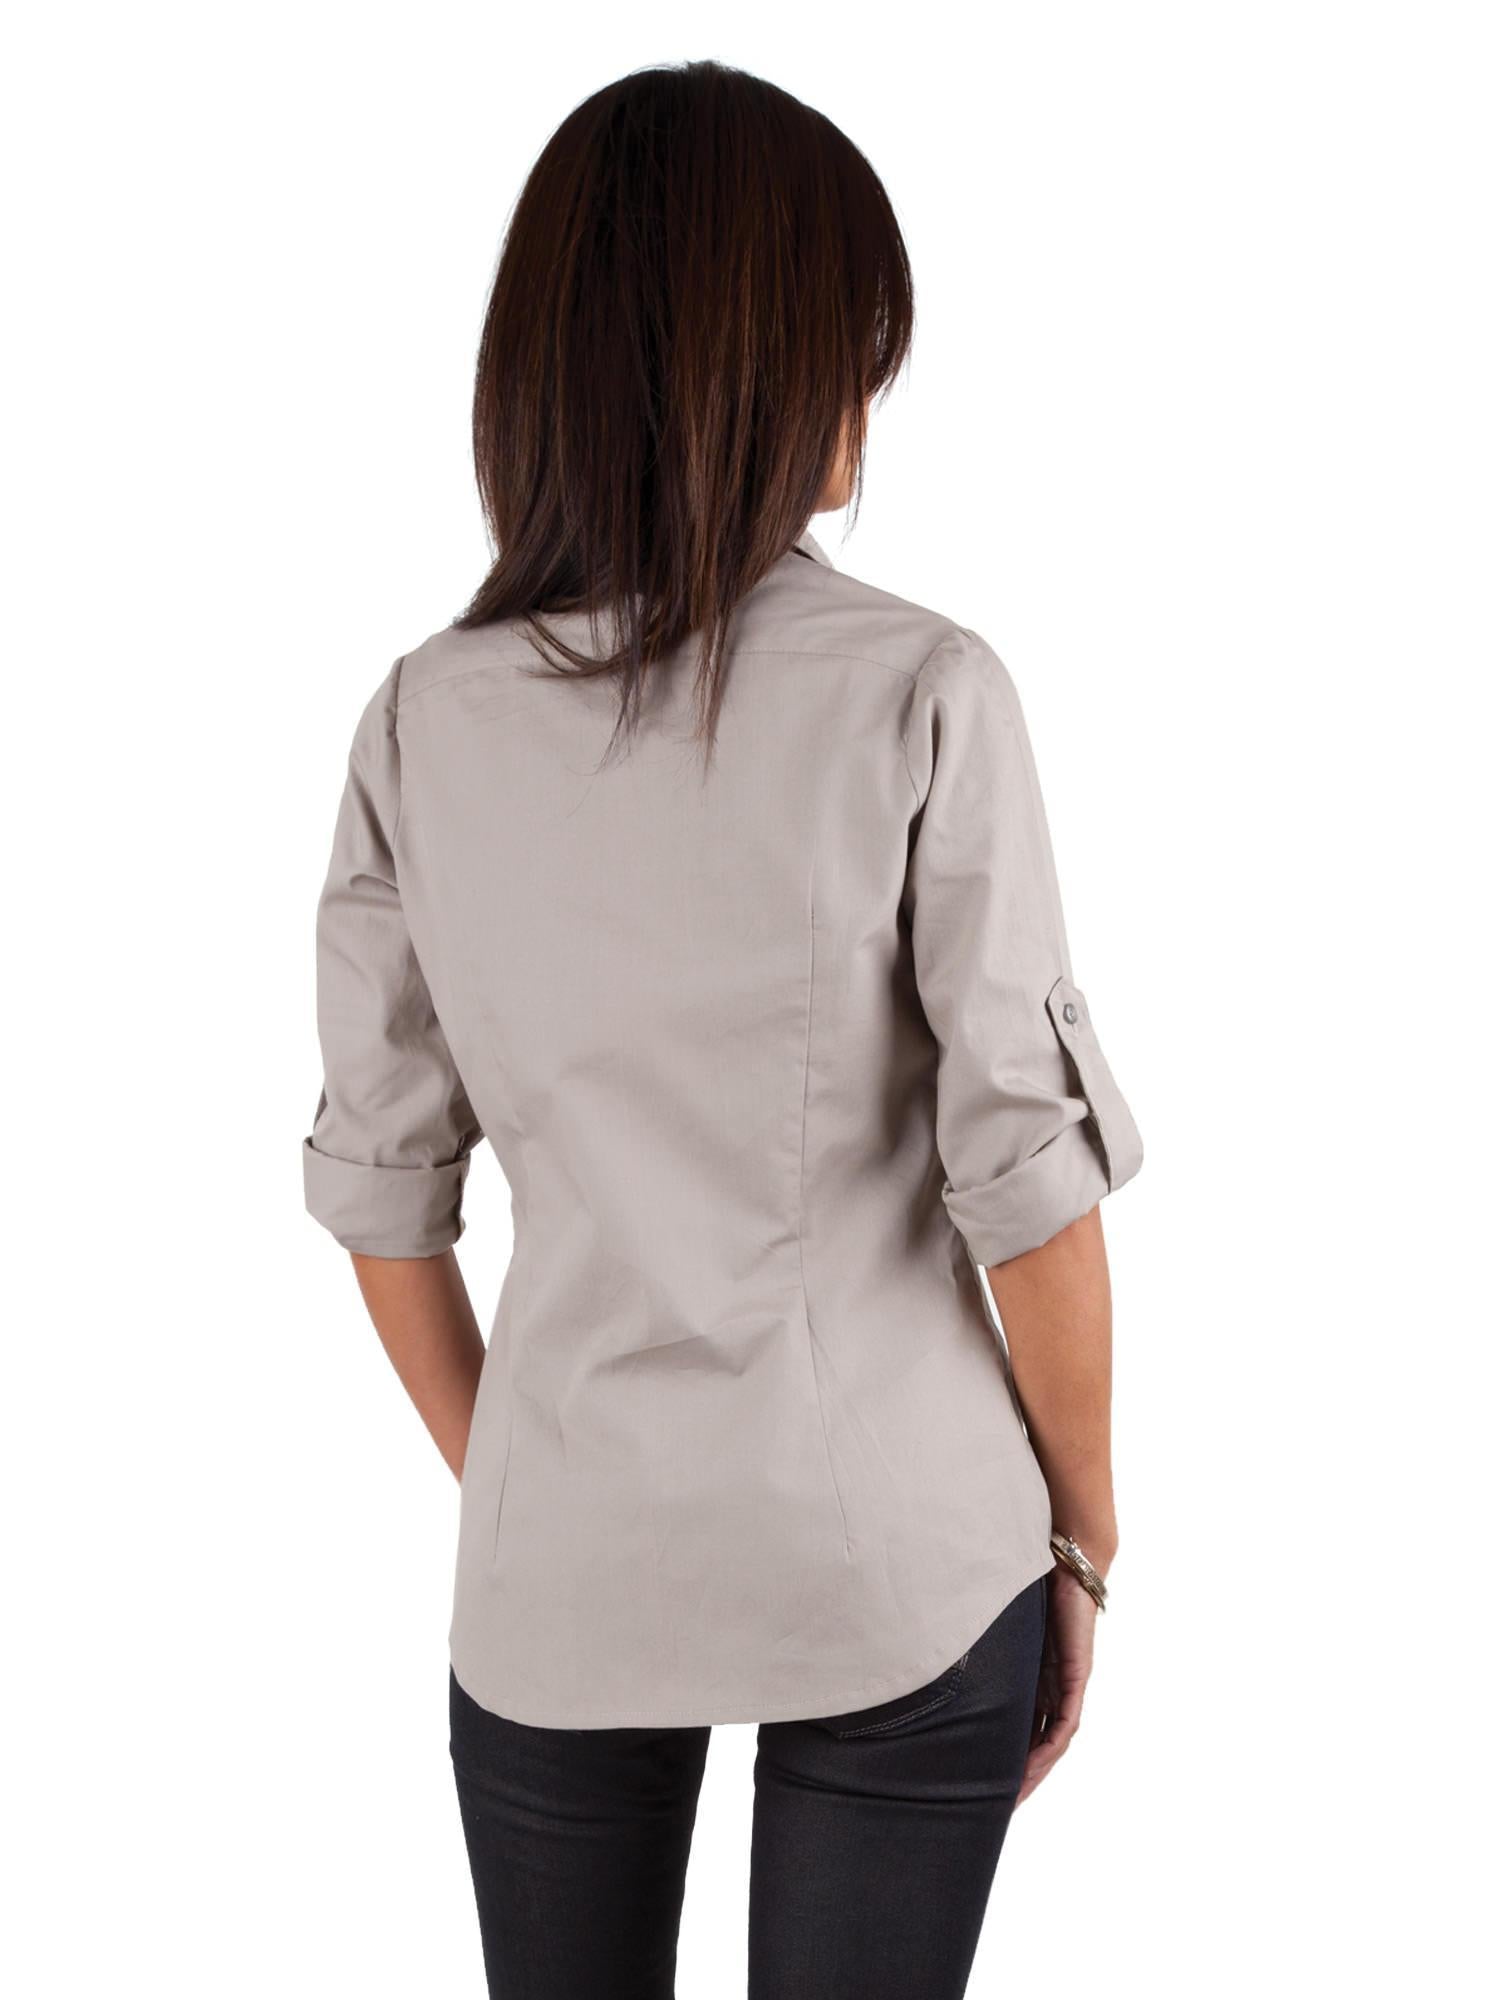 Jalie 3130 - Women's Shirt with Pockets and Sleeve Tabs